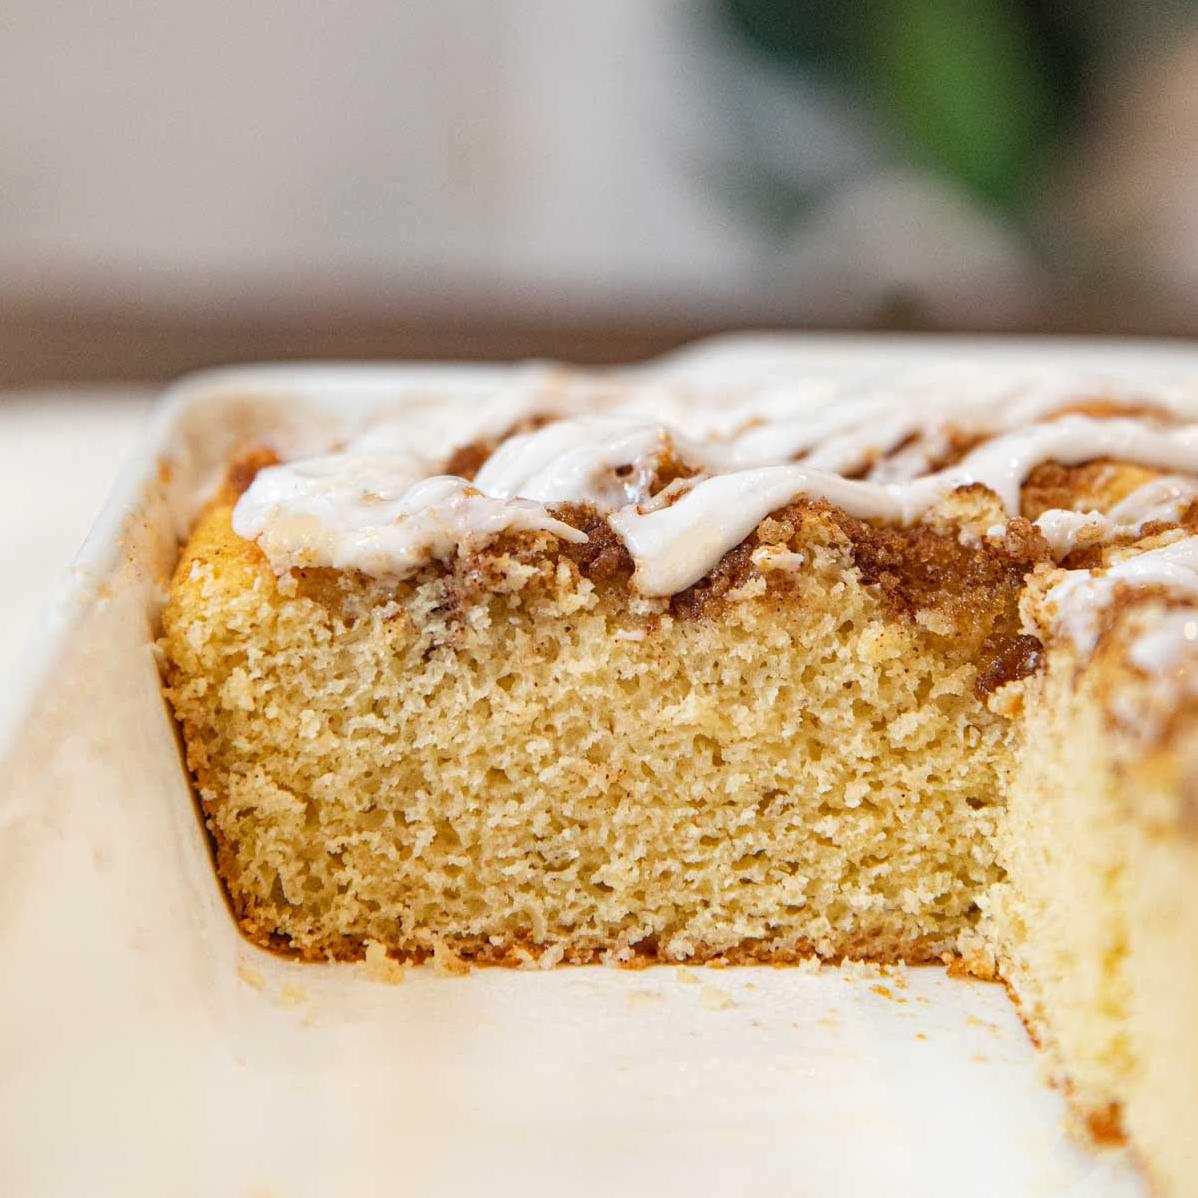  Who says you can't have your cake and eat it too? Try this low-fat coffee cake!